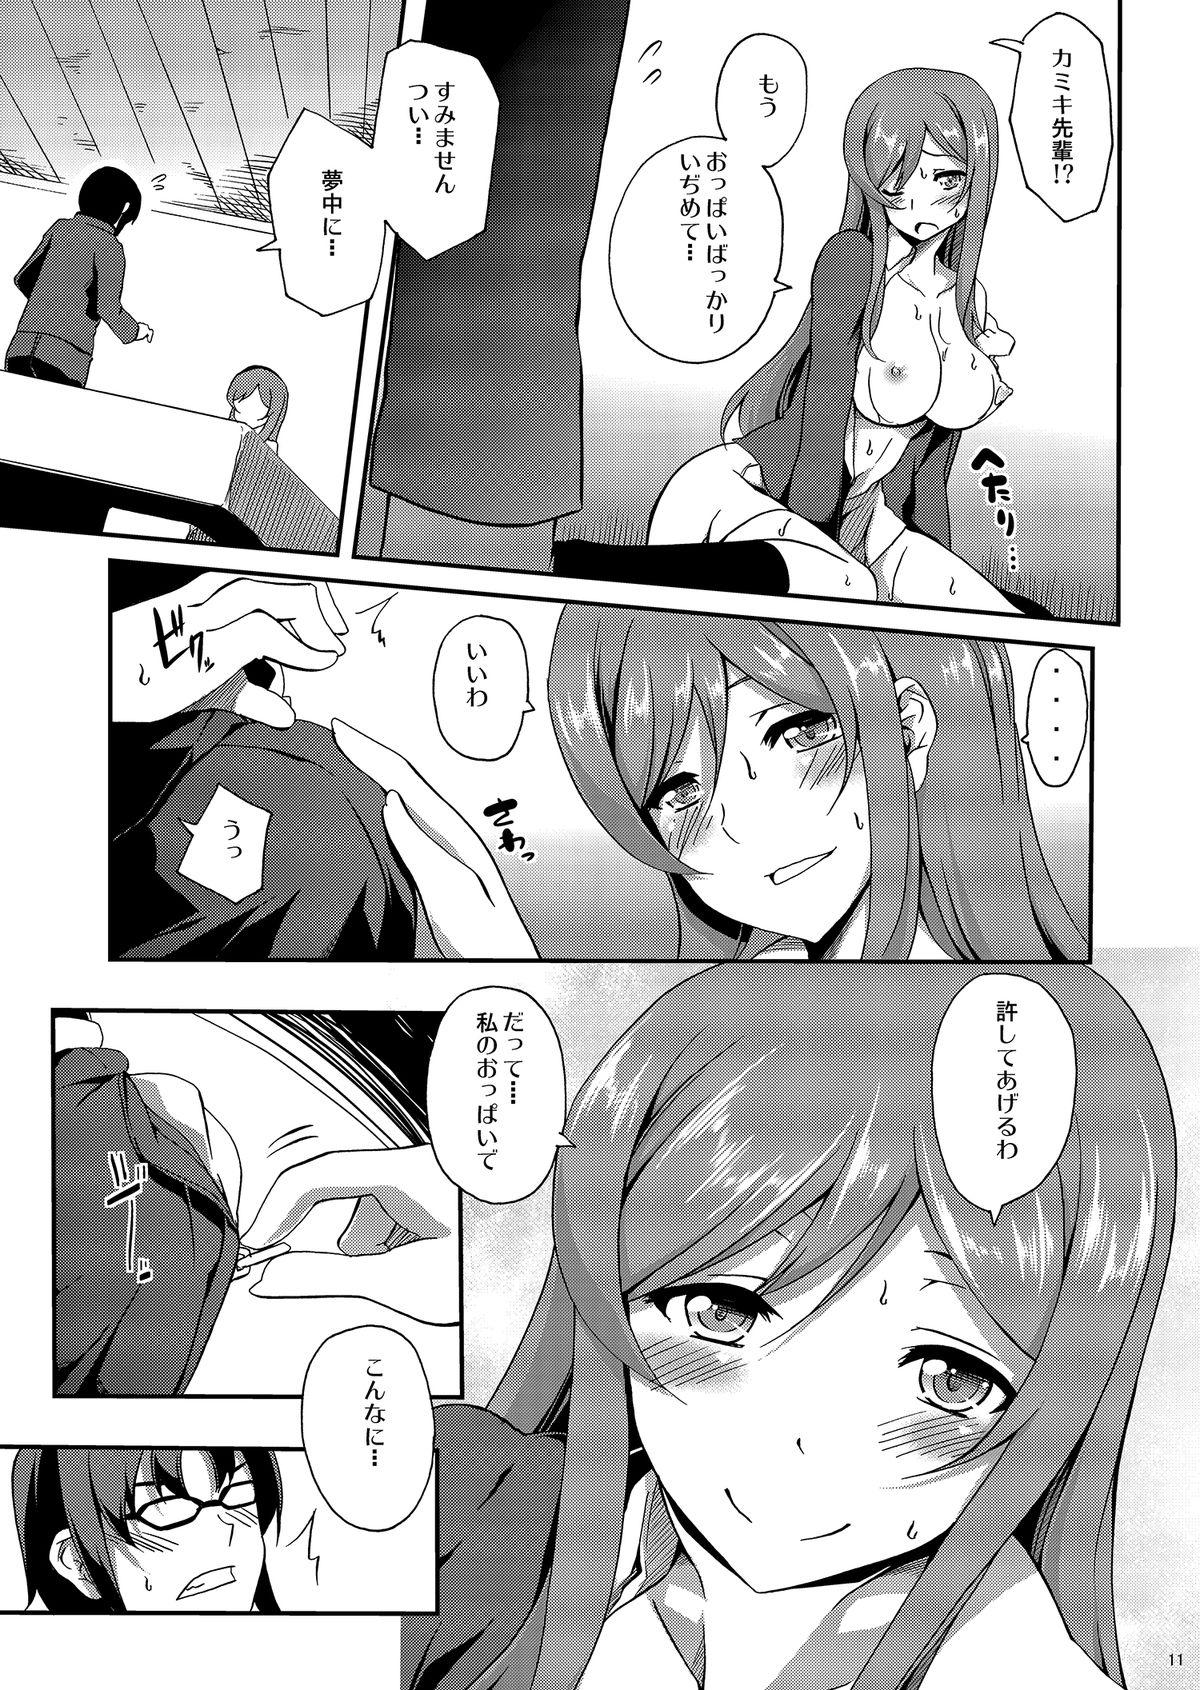 Bigcock Mirai no Onegai - Gundam build fighters try Hairy Pussy - Page 10